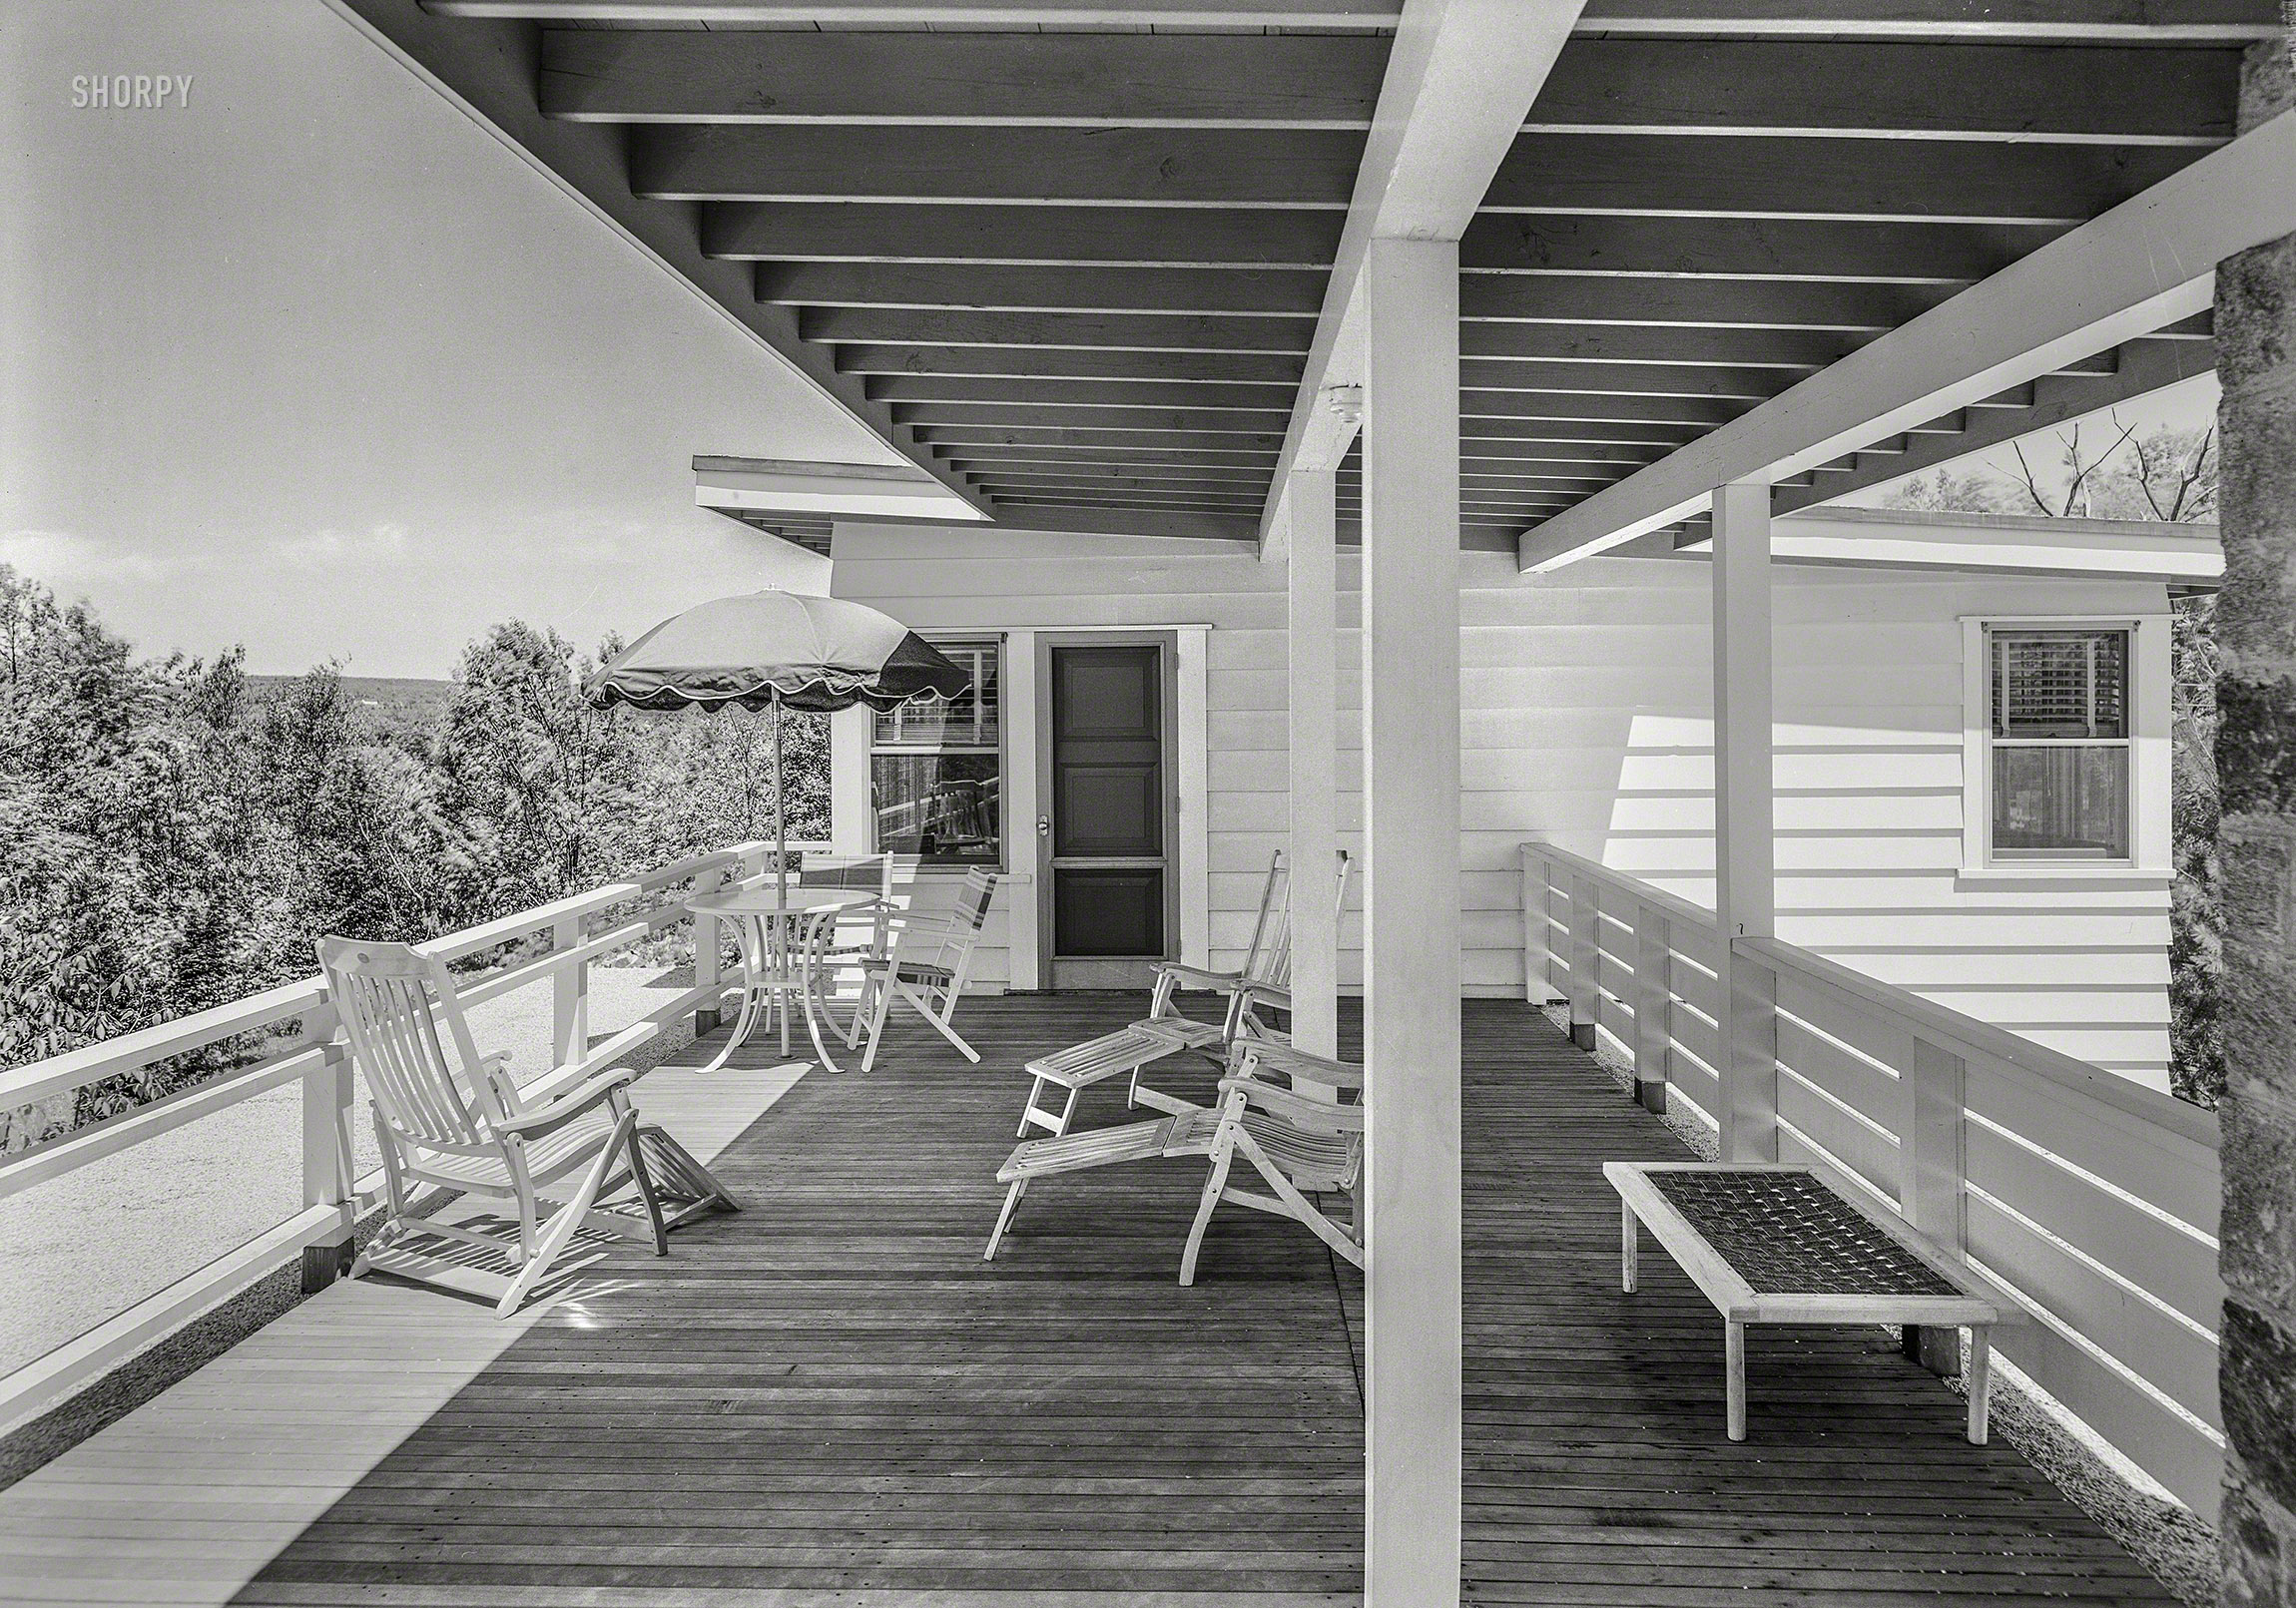 May 30, 1940. "Bertram F. Willcox residence in Pound Ridge, Westchester County, New York. Upper deck. Moore & Hutchins, architect." The house last seen here. Large-format acetate negative by Gottscho-Schleisner. View full size.